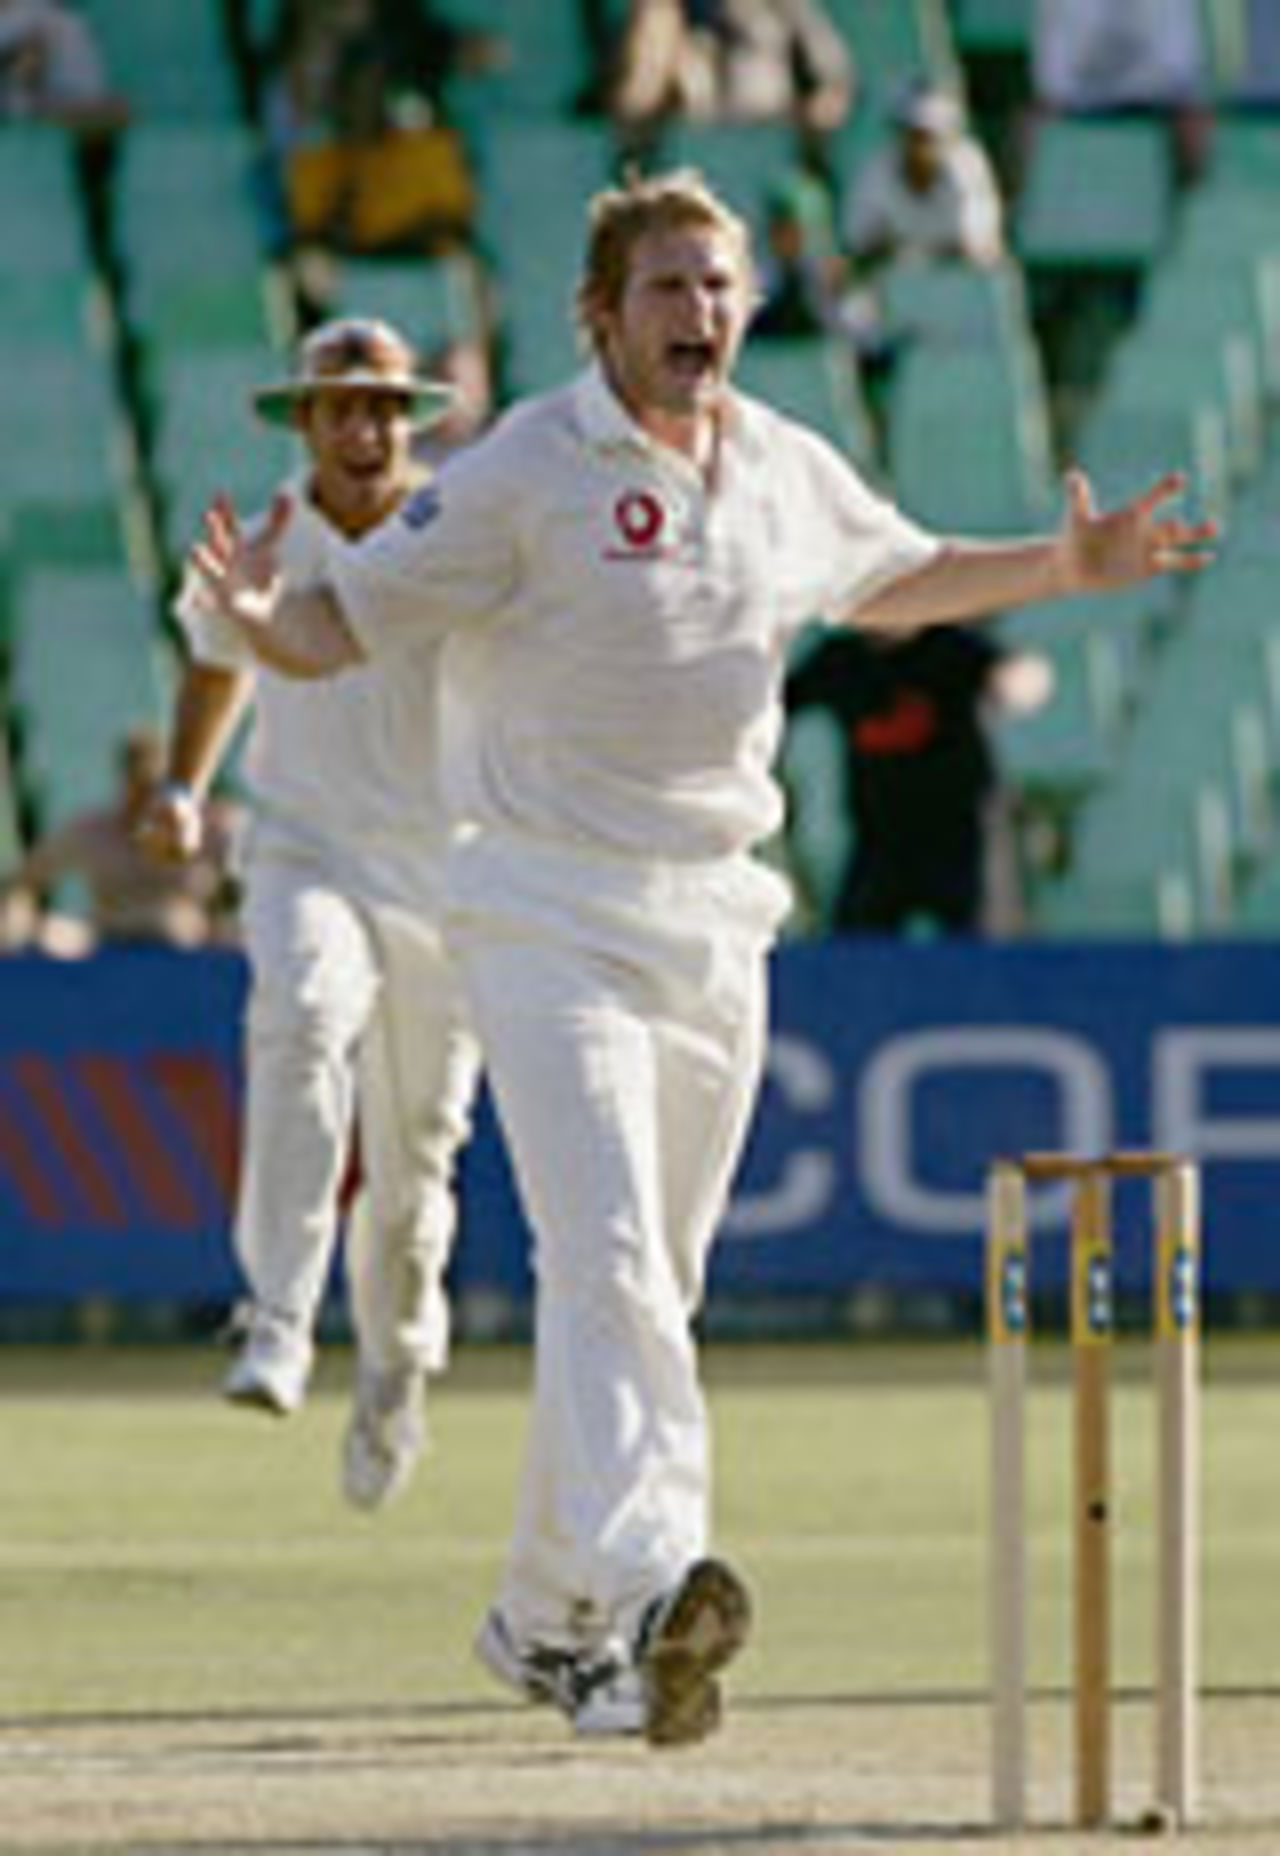 Matthew Hoggard claims Graeme Smith's wicket, South Africa v England, 2nd Test, Durban, 4th day, December 29 2004